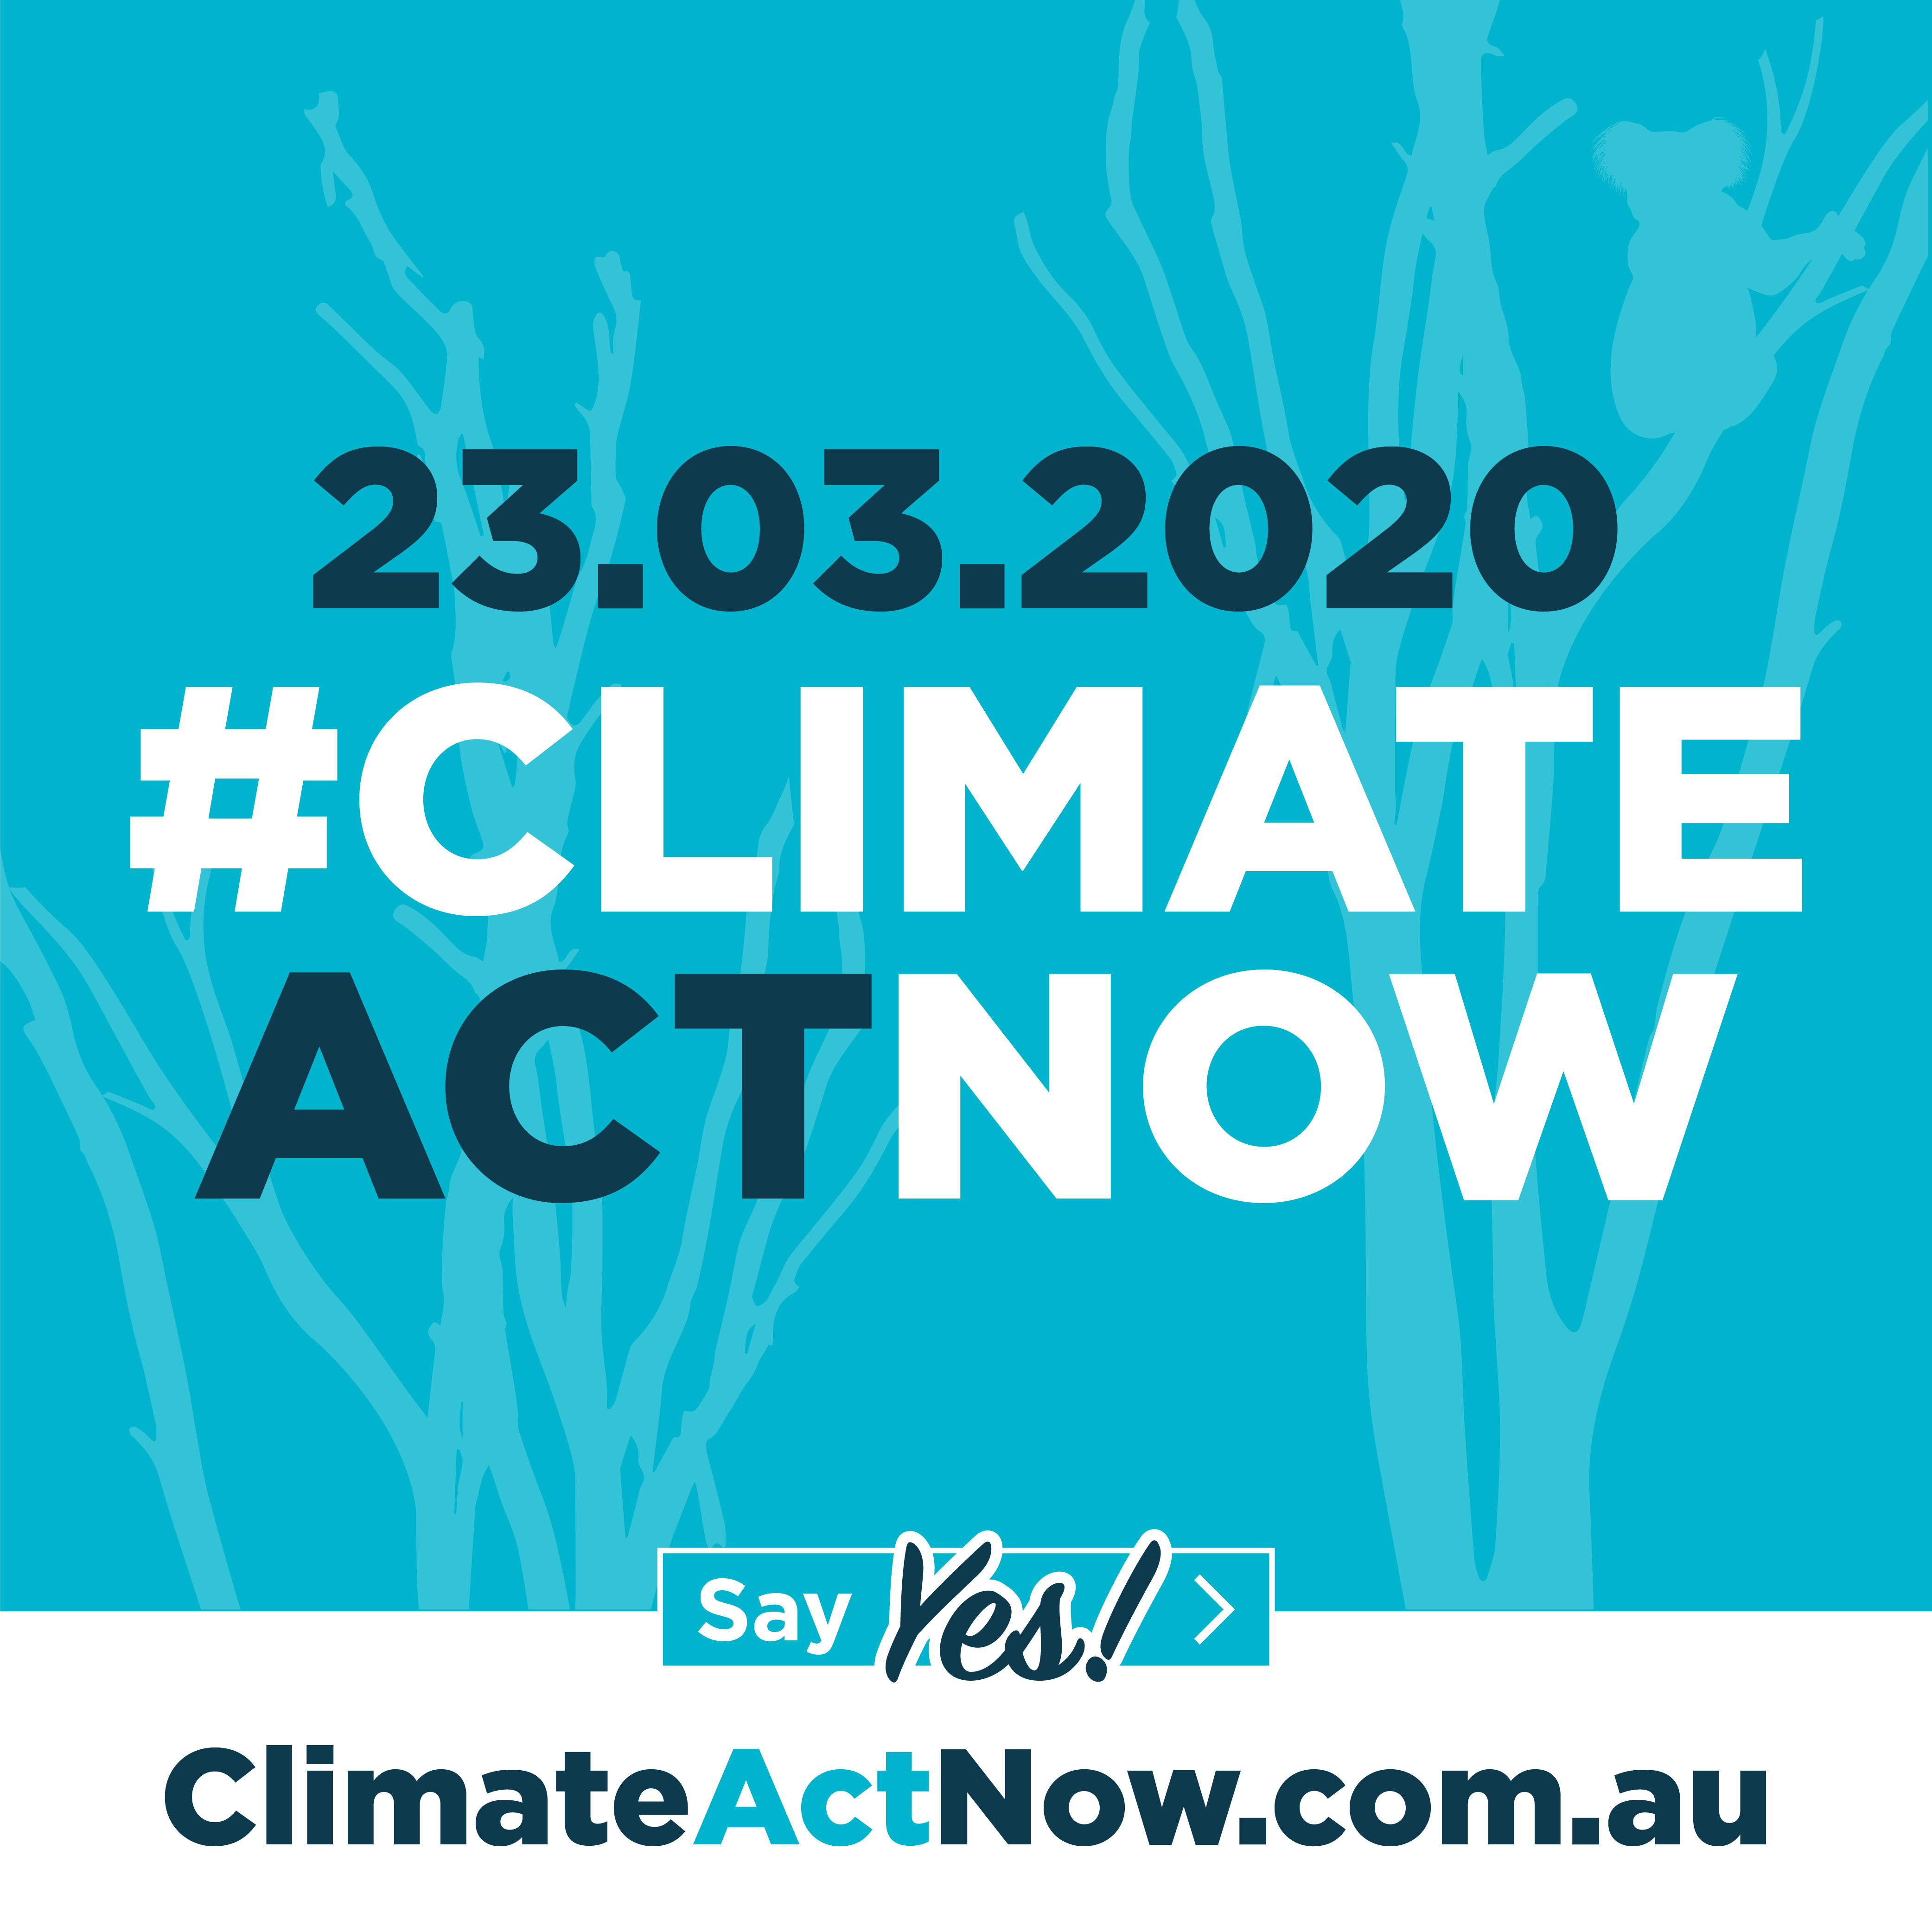 Post 2 1 Let’s get 2 million to sign the Climate Act Now petition!